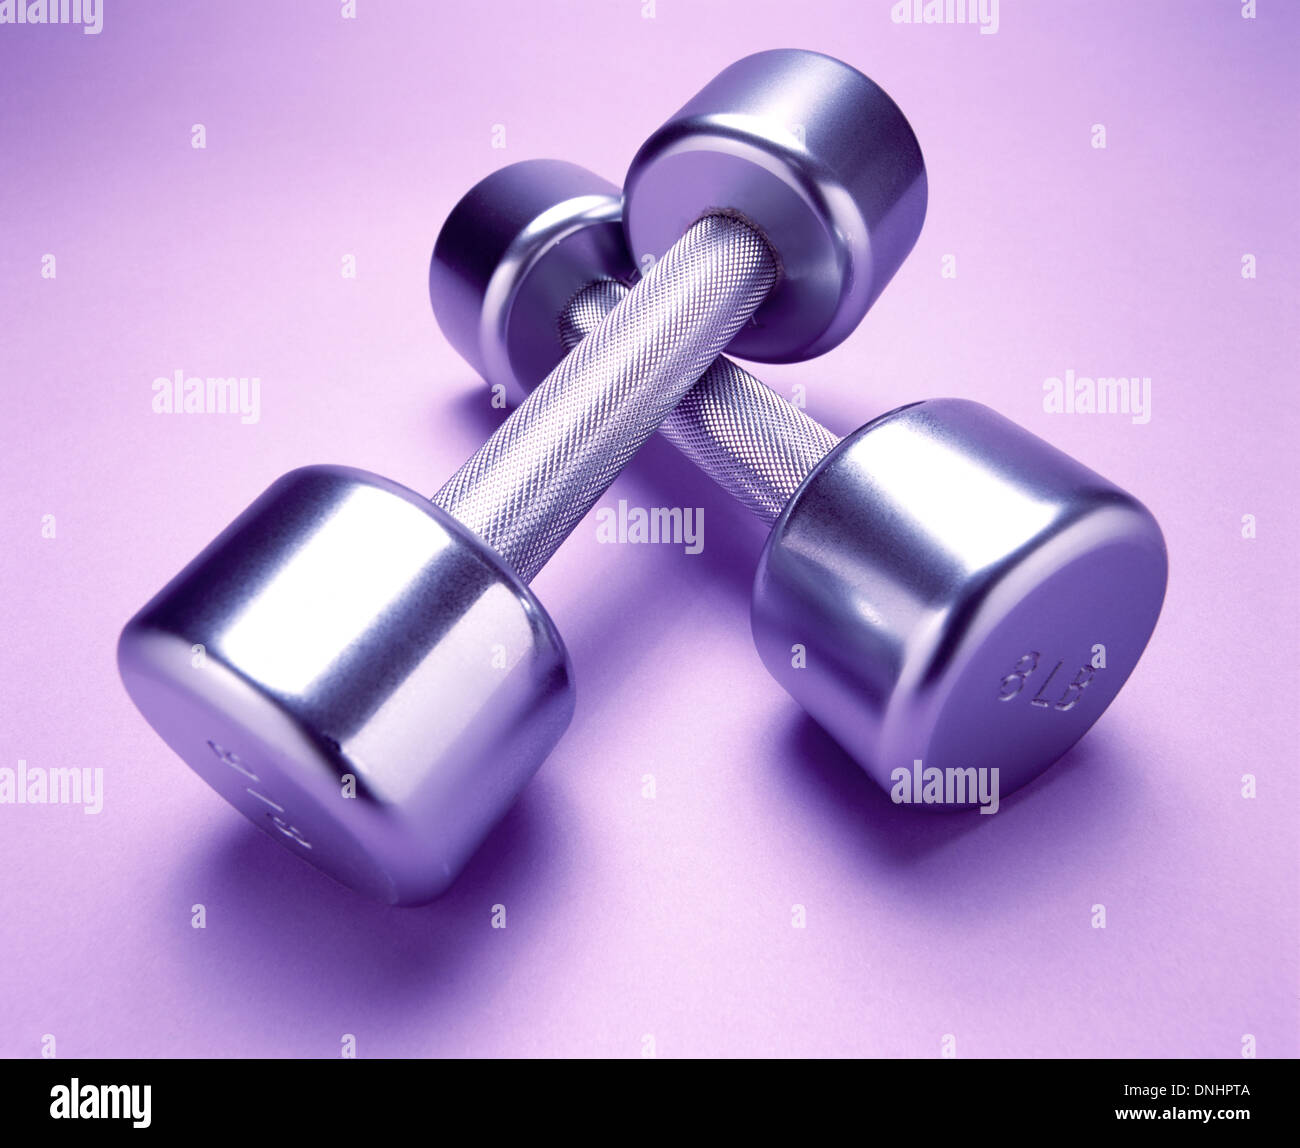 A pair of exercise metal free weights on a light purple exercise mat. Stock Photo